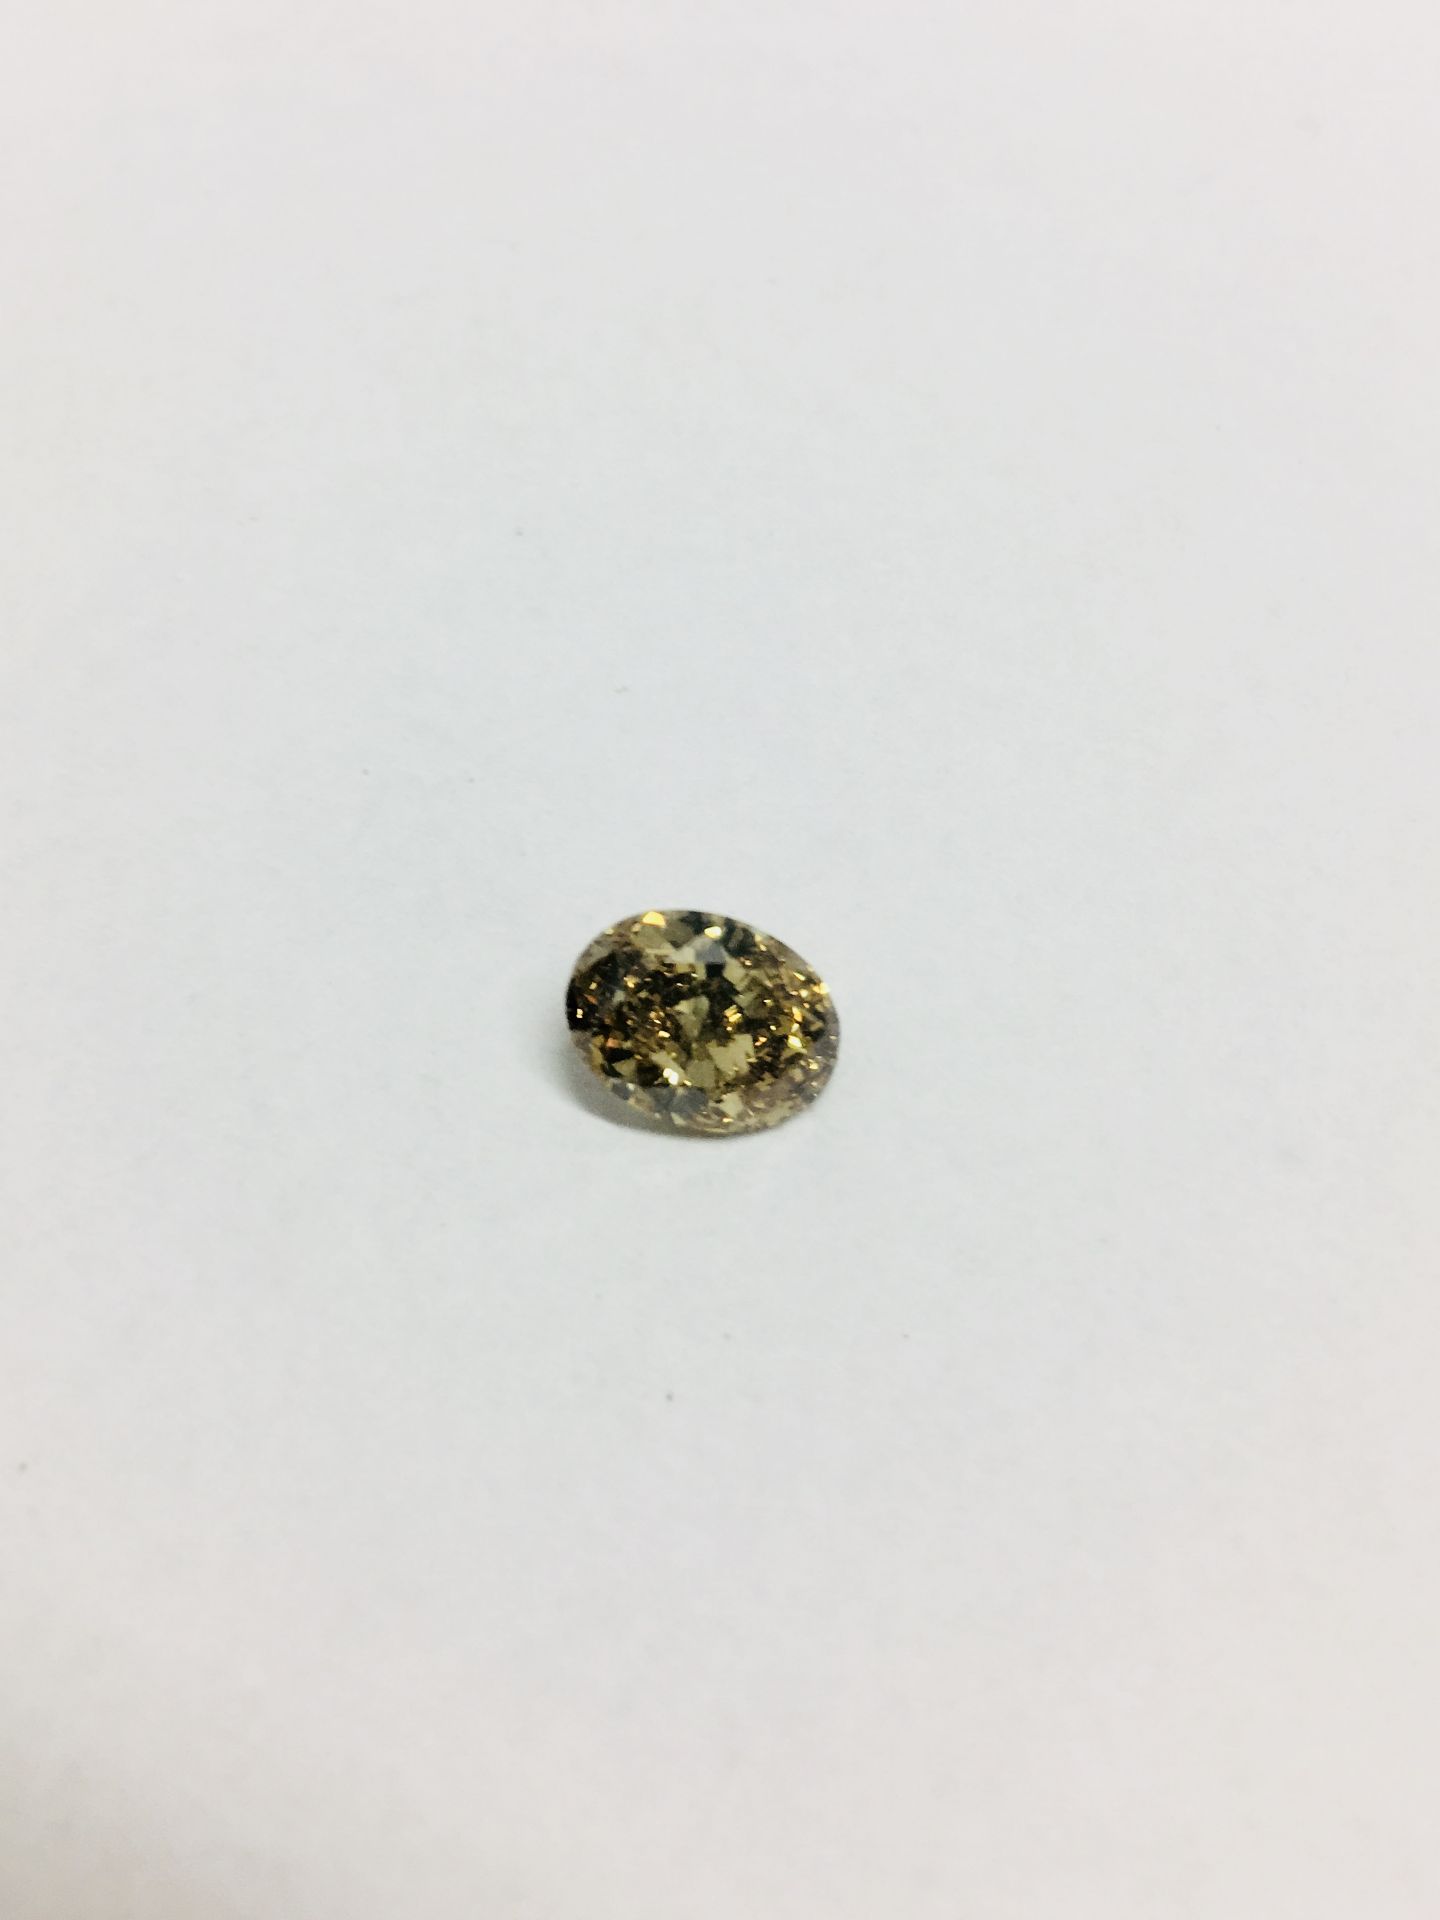 1.67ct Fancy oval diamond,vs2 clarity,fancydeep brown -yellow.hpht treated ,GIA certification